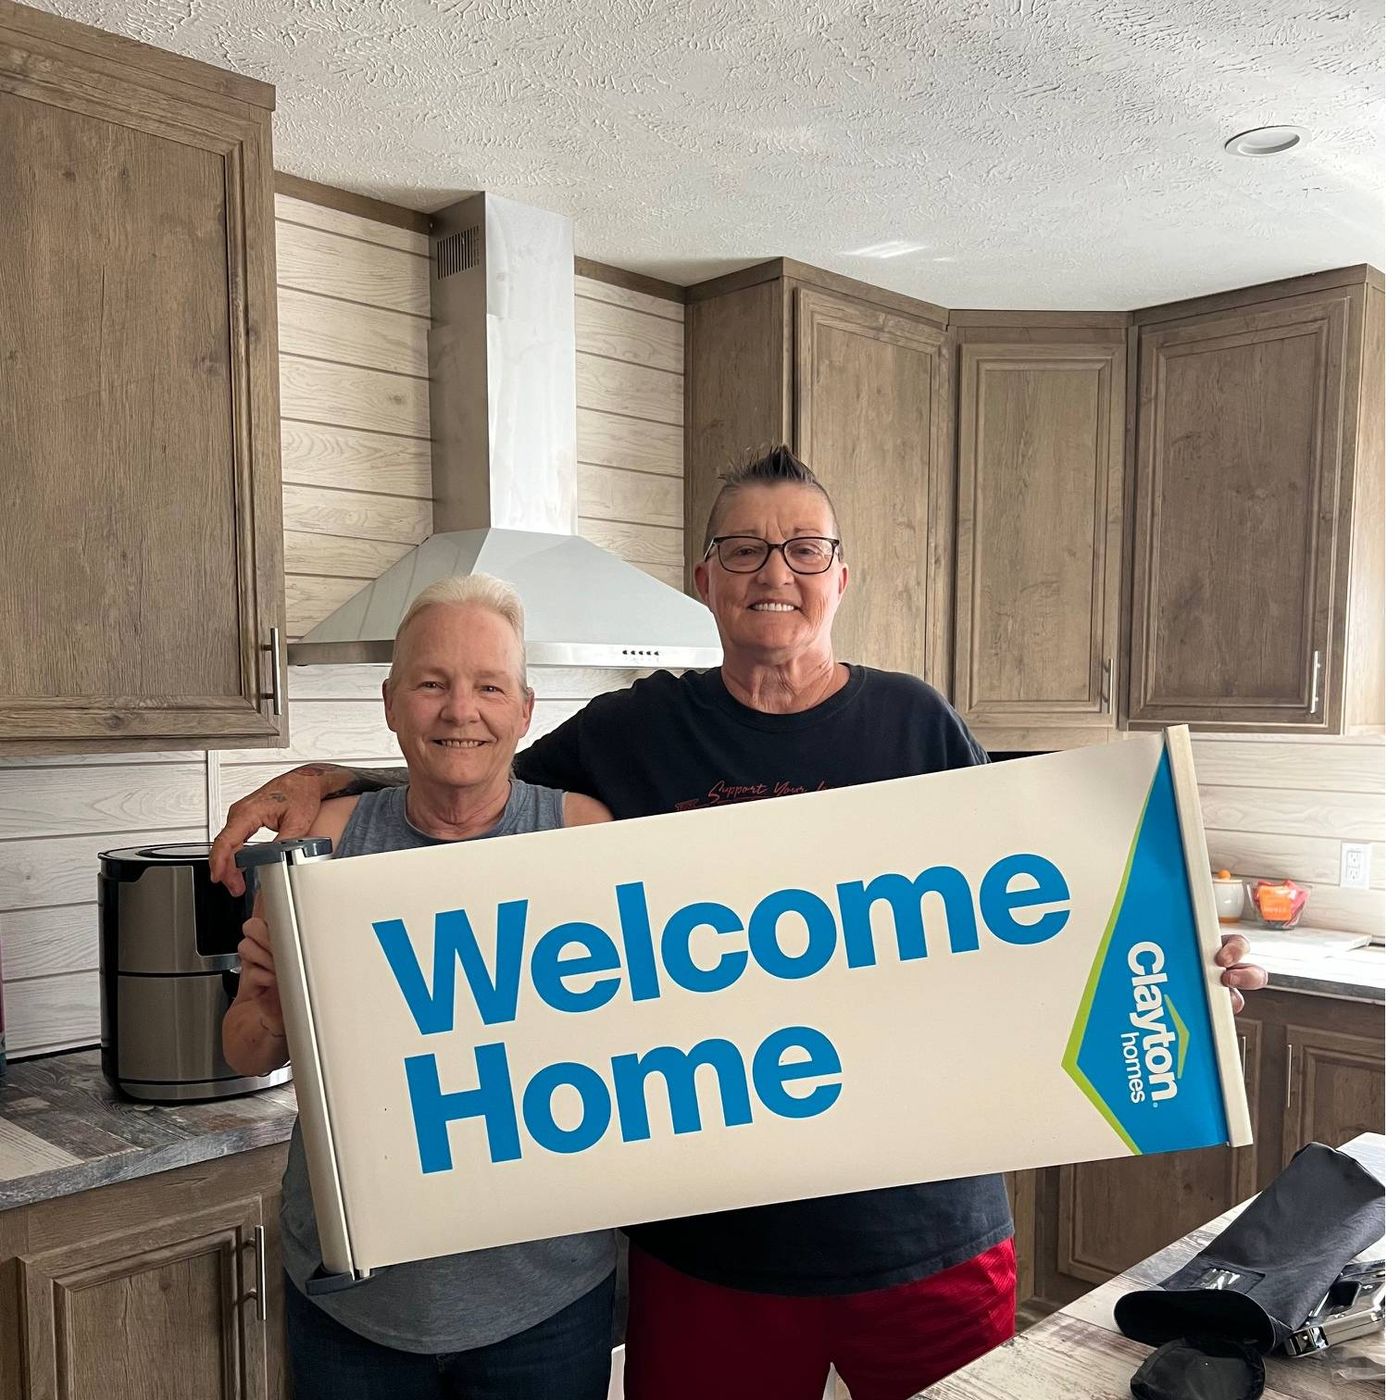 LUANNE B. welcome home image